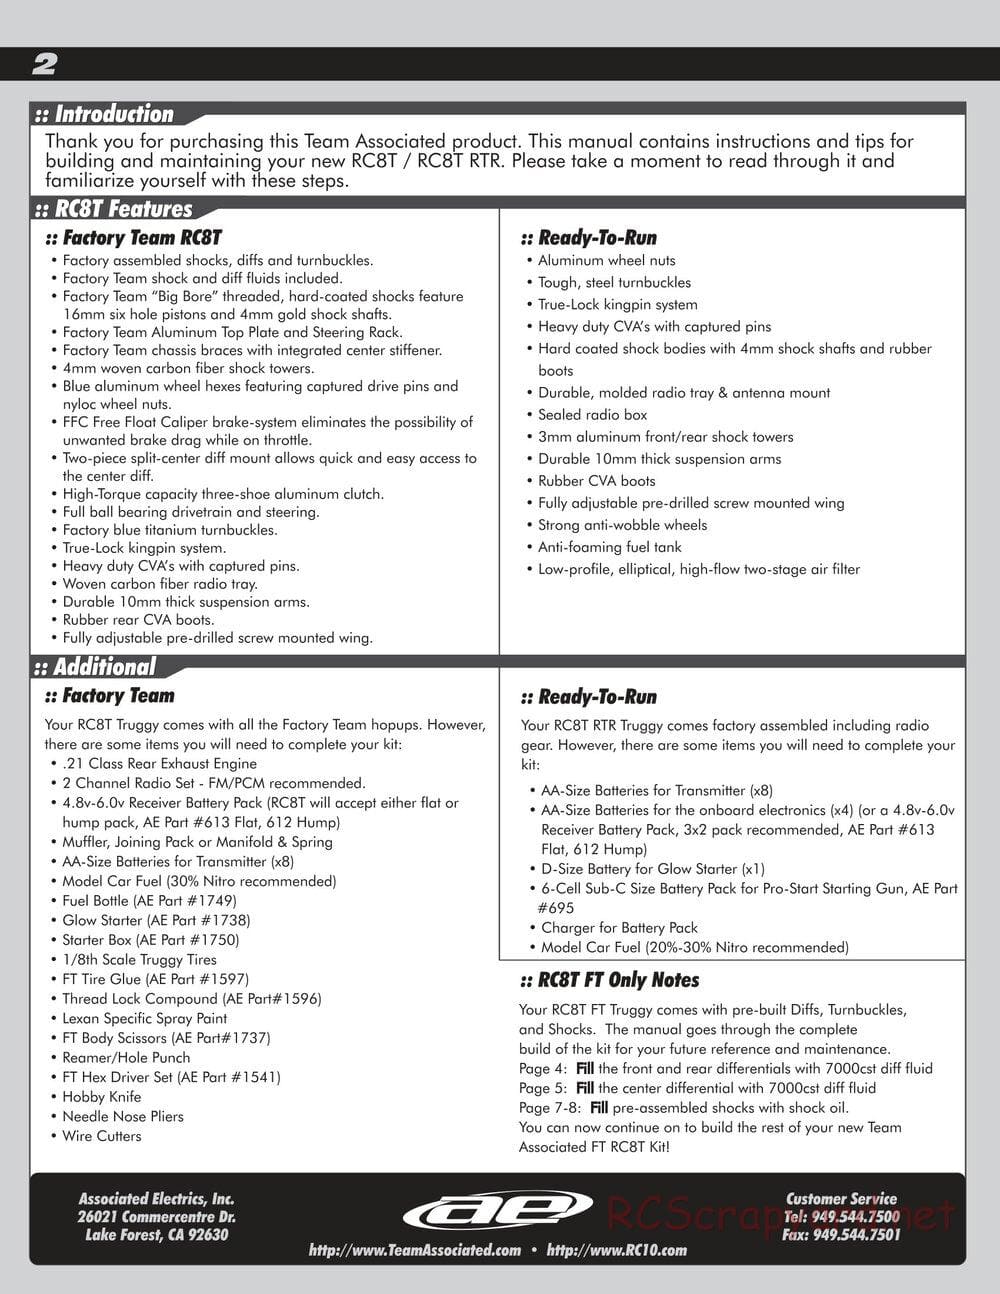 Team Associated - RC8T RTR - Manual - Page 2